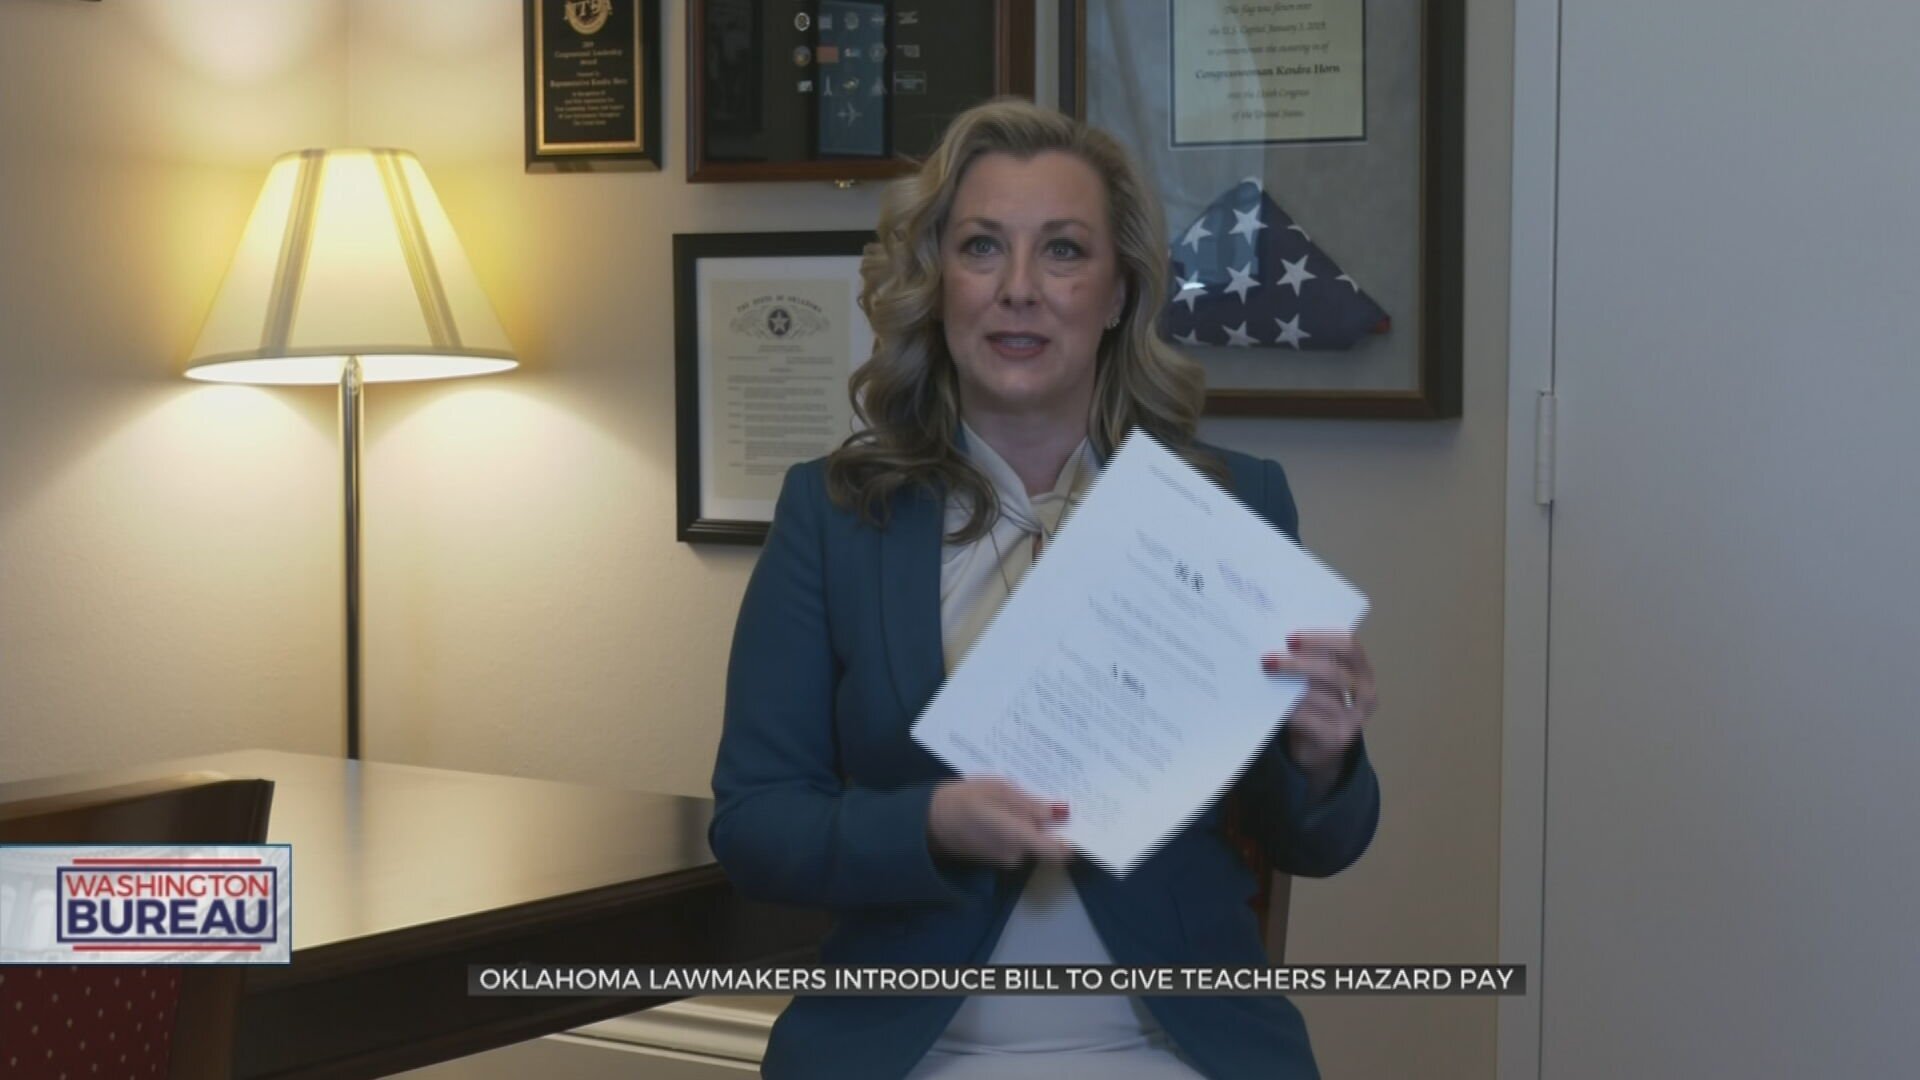 Oklahoma Lawmaker Introduces Congressional Bill To Give Teachers Hazard Pay